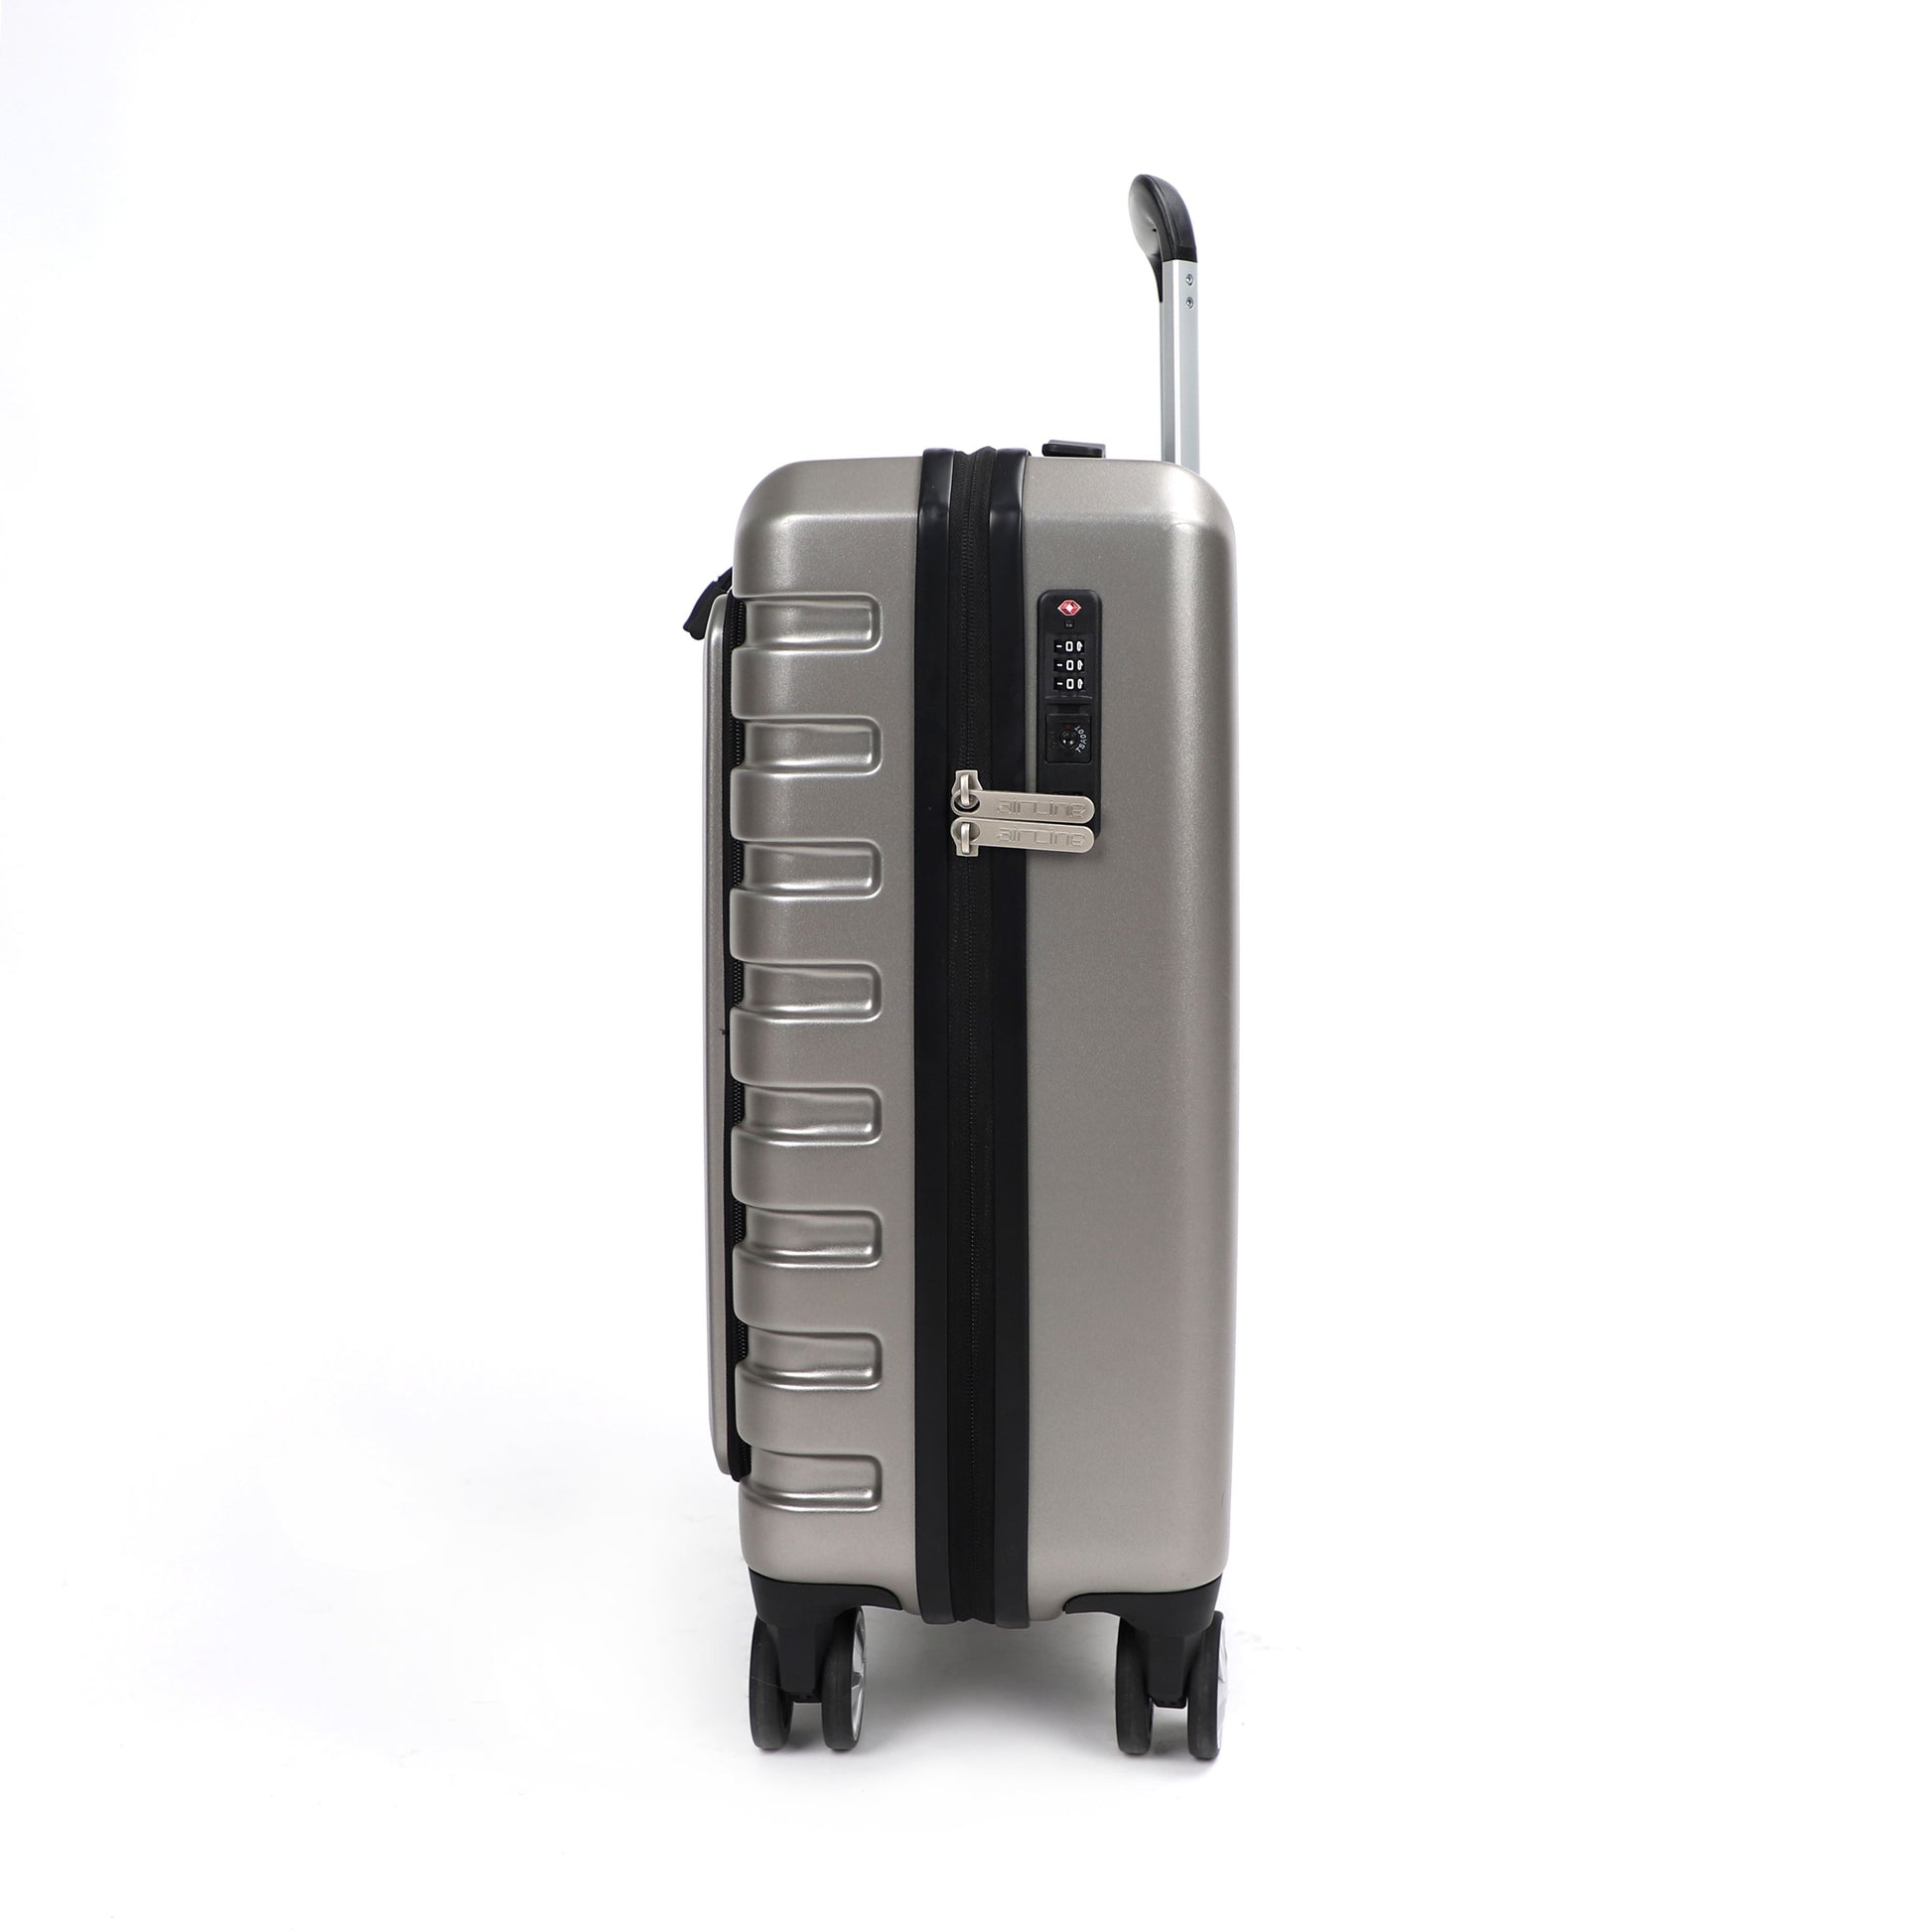 Airline_Carry_On_Luggage_iron_grey_right_view_T1978155101